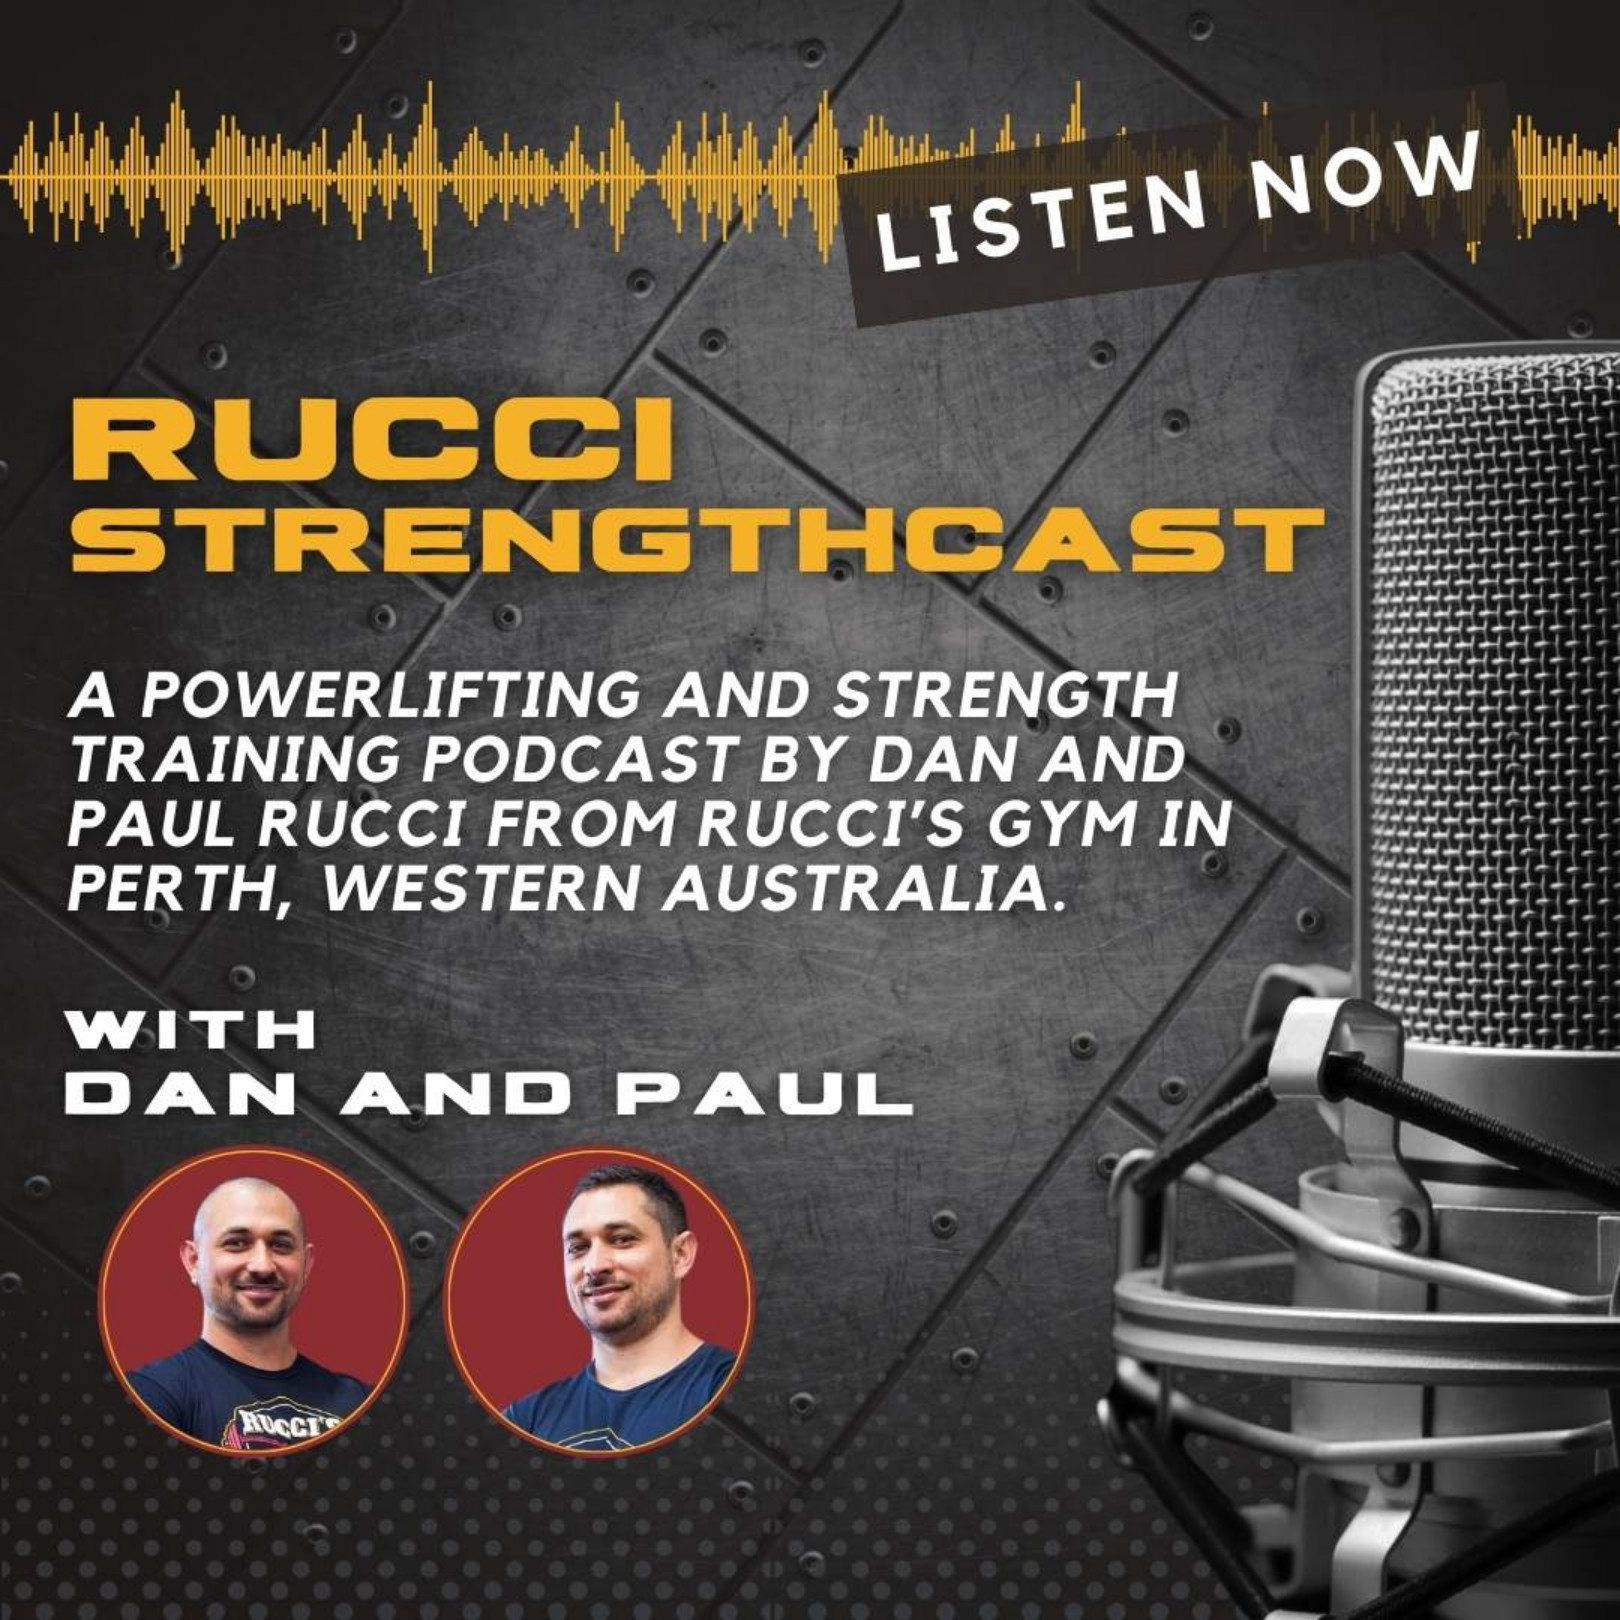 Rucci Strengthcast